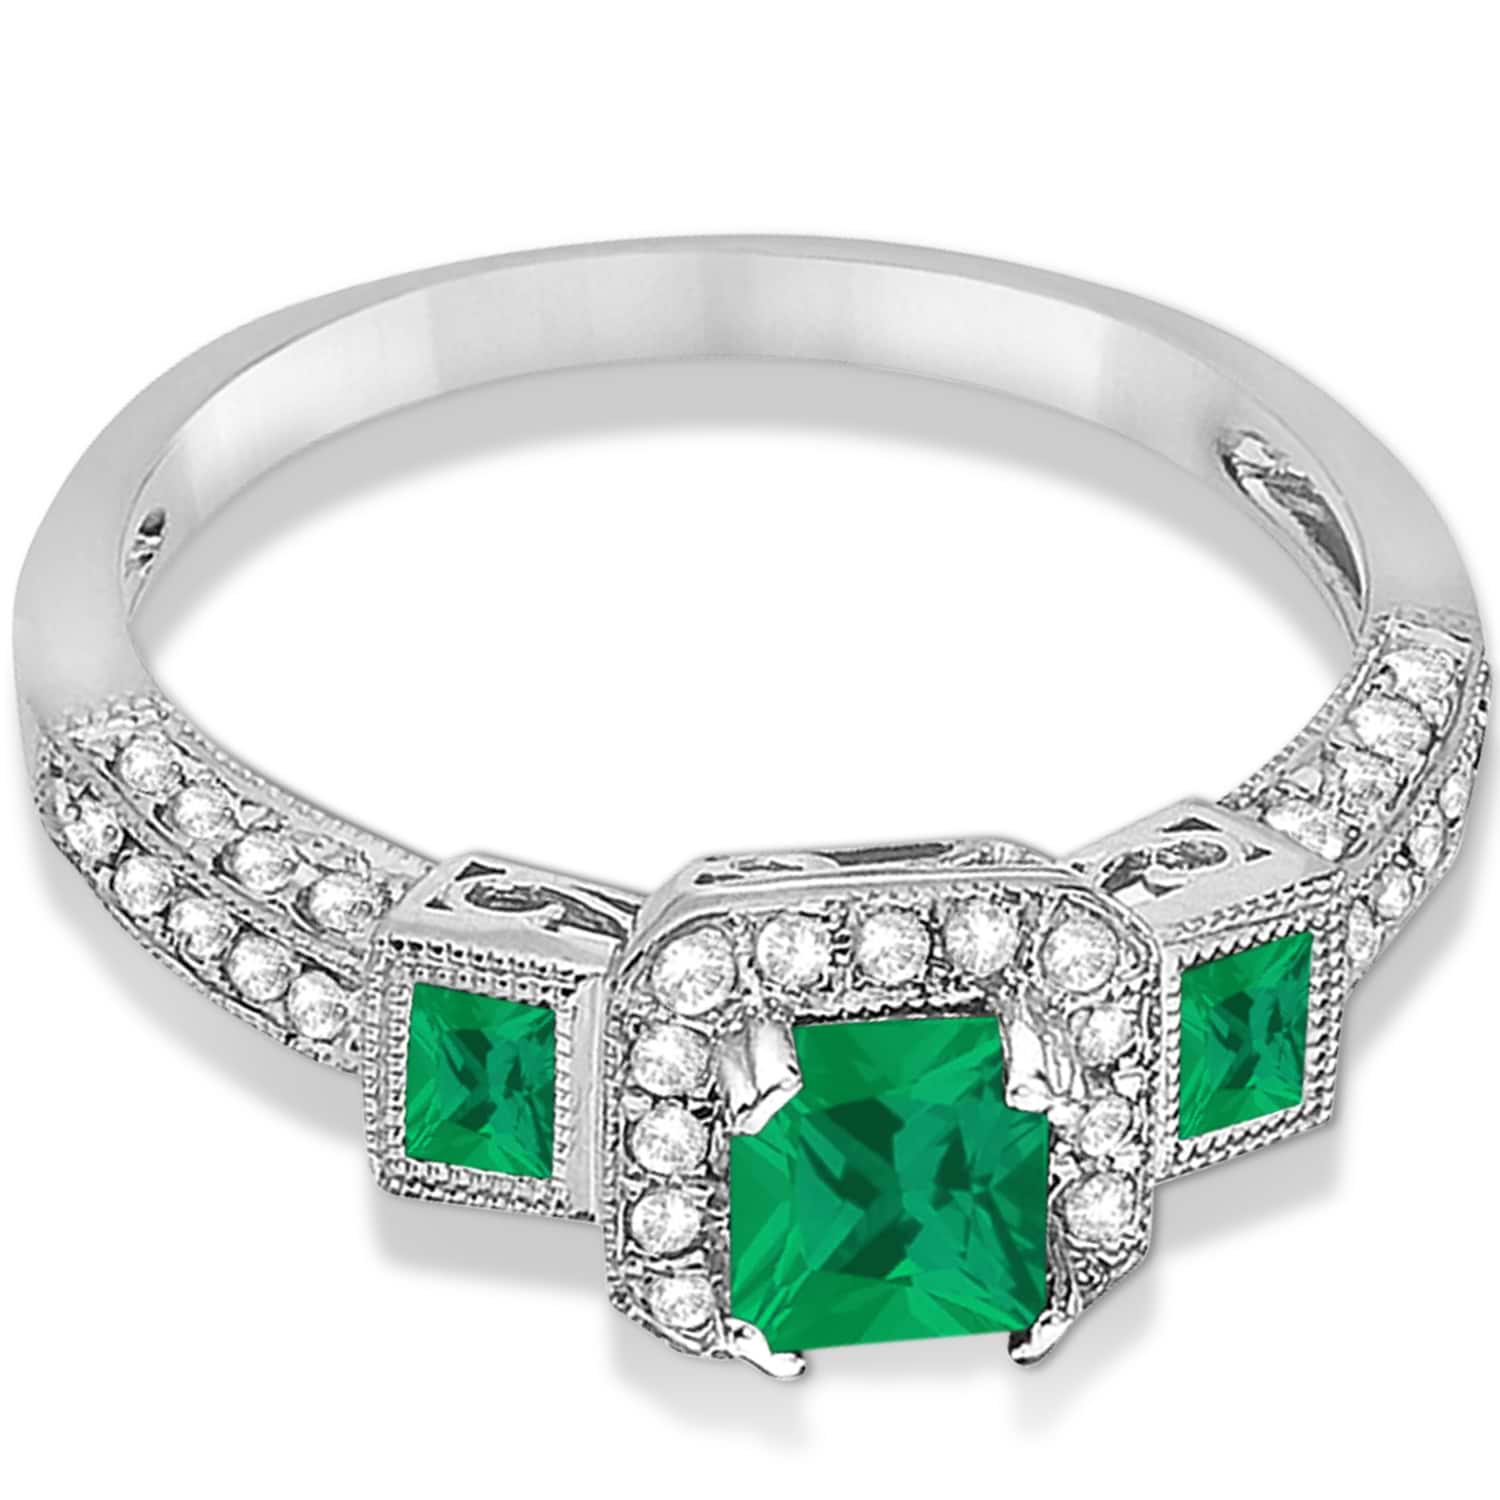 Emerald And Diamond Engagement Ring In 14k White Gold 135ctw Cbr537 8831